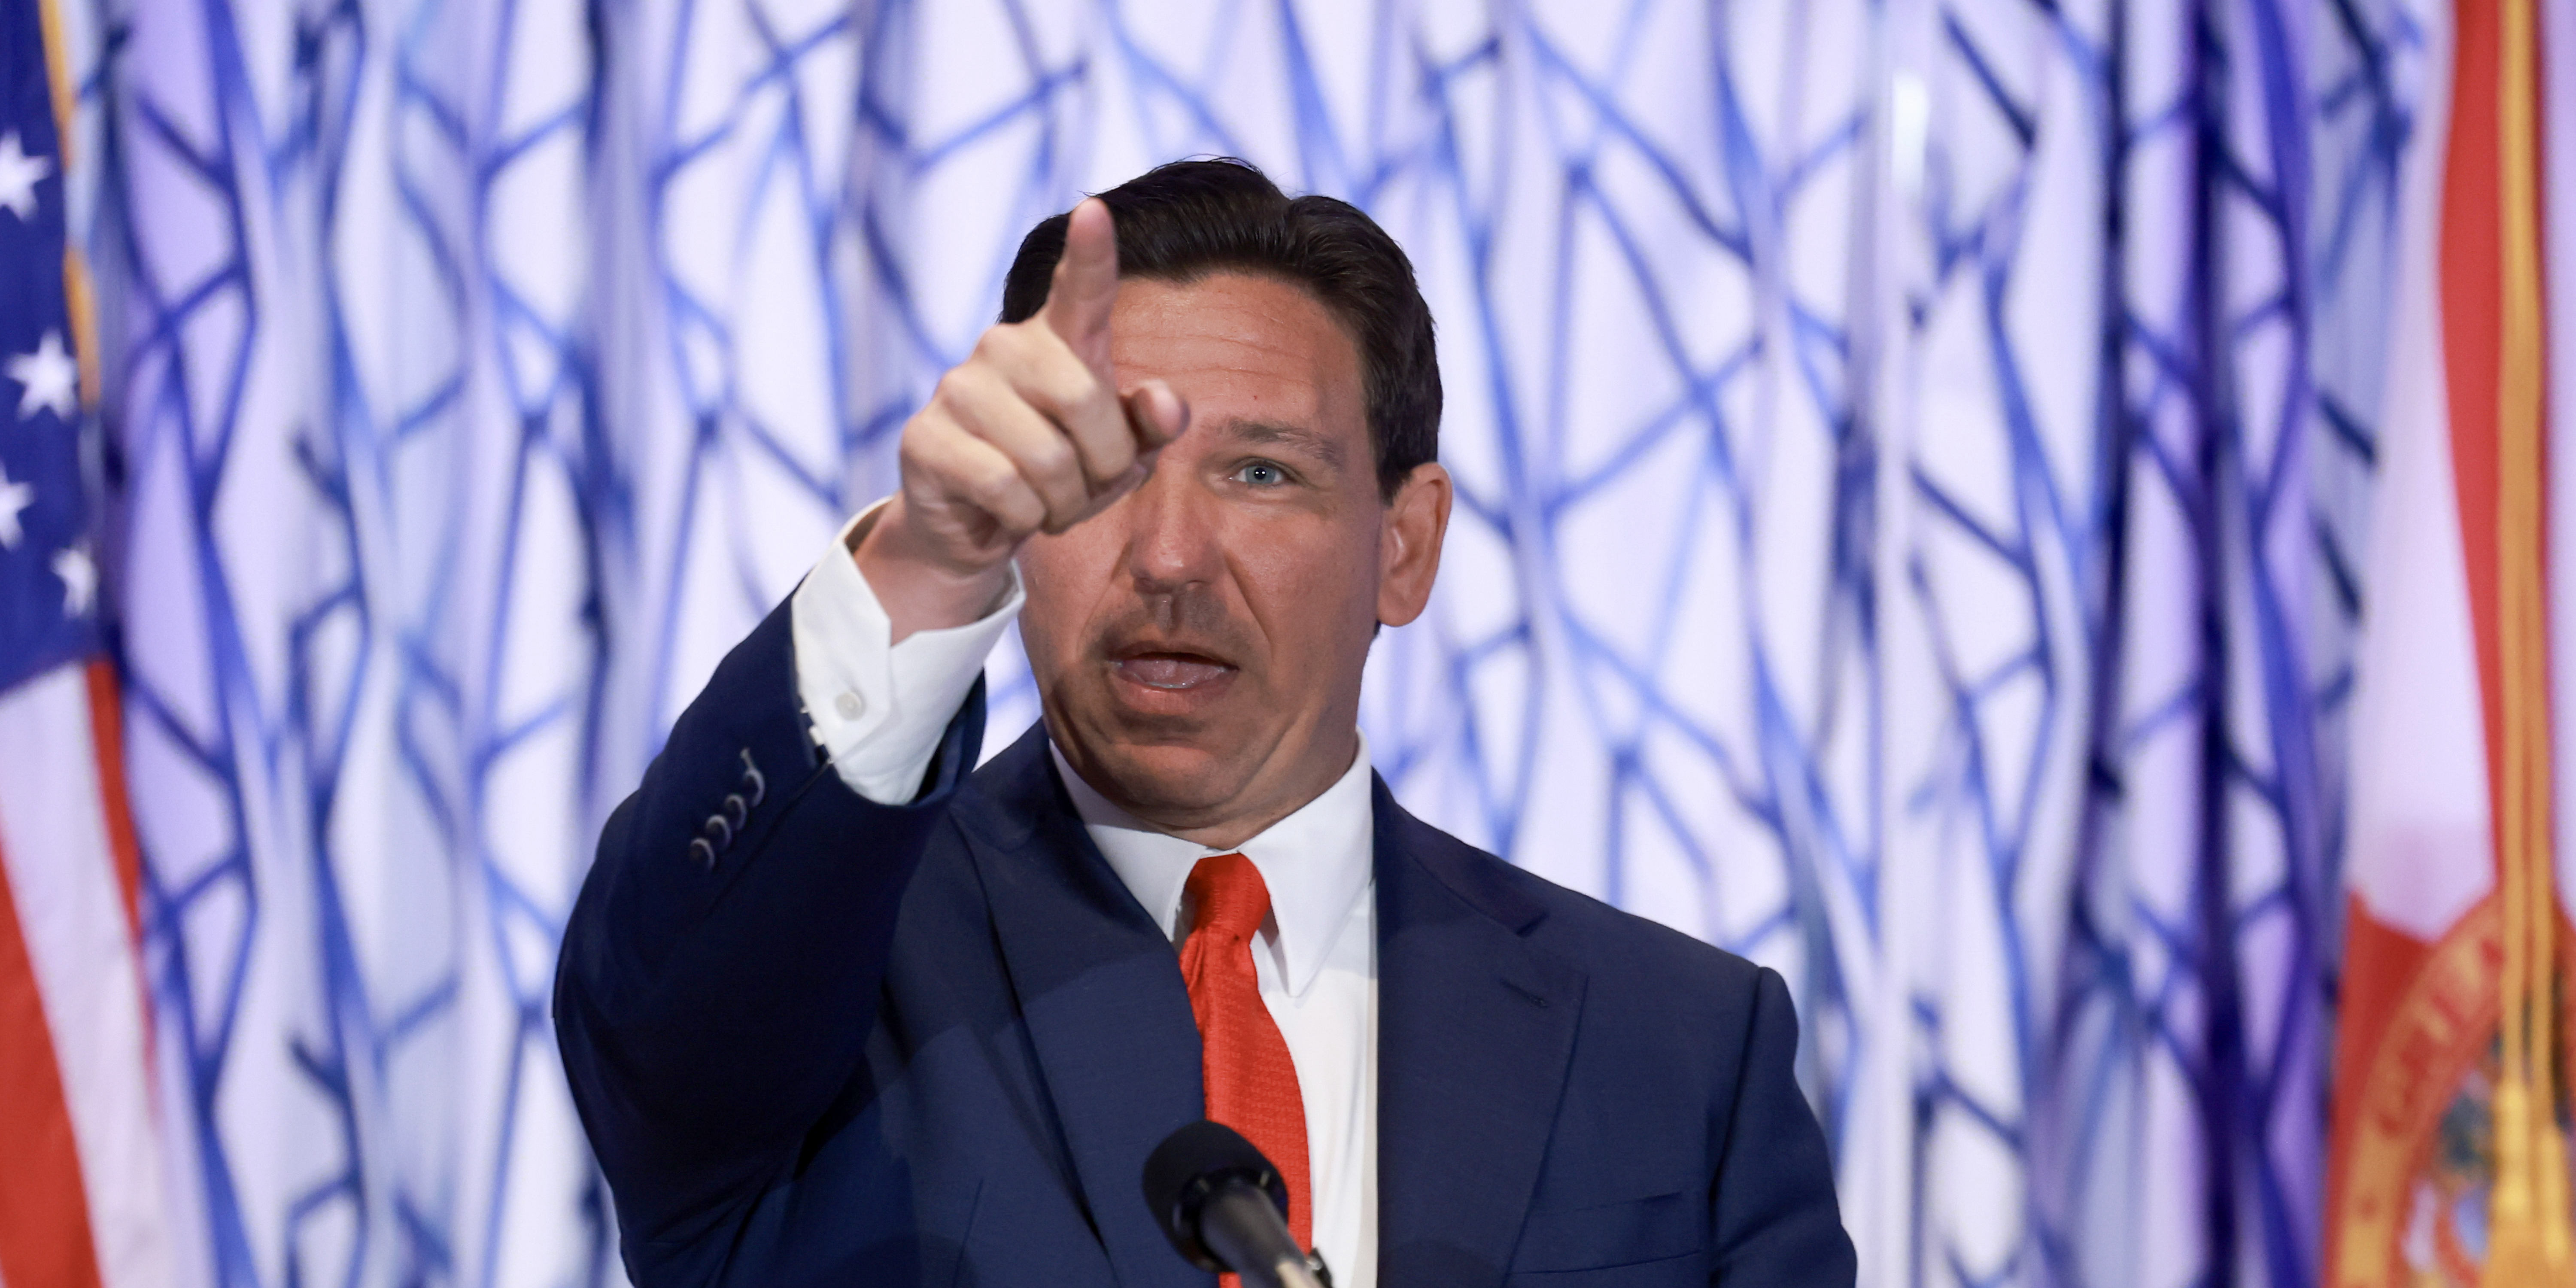 MIAMI BEACH, FLORIDA - MARCH 20: Florida Gov. Ron DeSantis during a news conference on March 20, 2024 in Miami Beach, Fla., where he signed a state law addressing homelessness.(Photo by Joe Raedle/Getty Images)